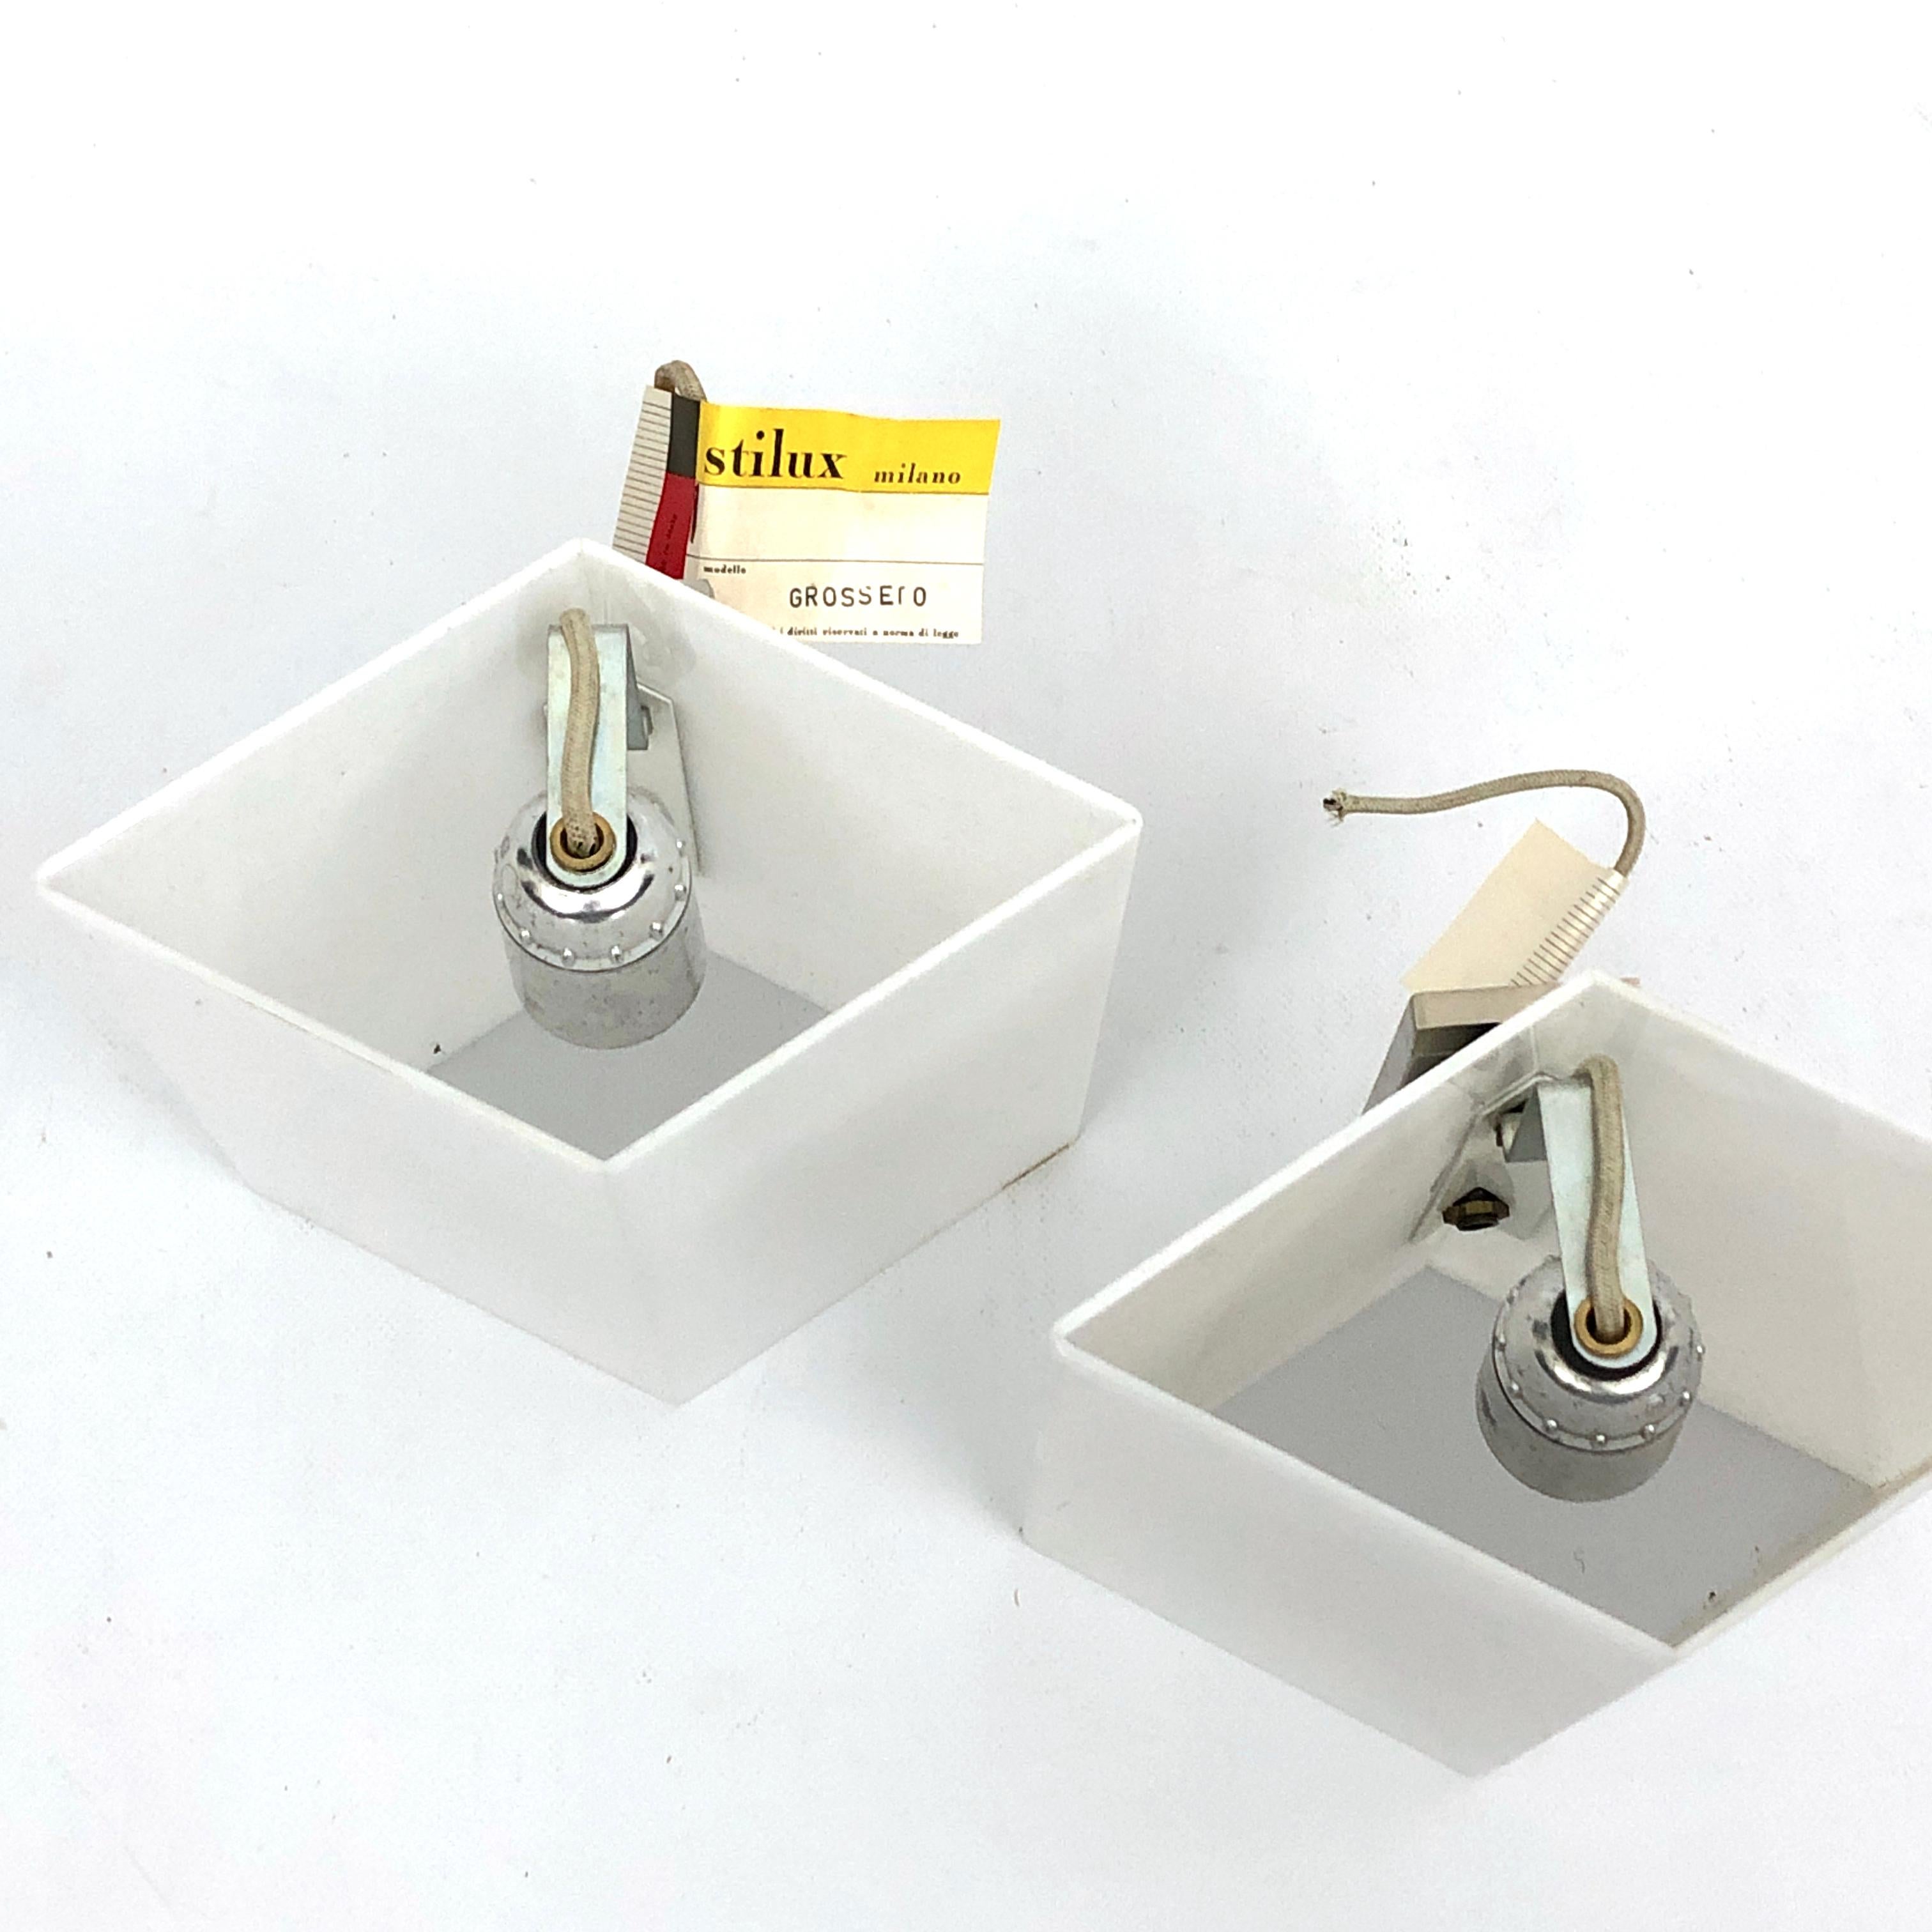 Rare Stilux Milano Model Grosseto, Pair of Perspex Sconces from 60s For Sale 4